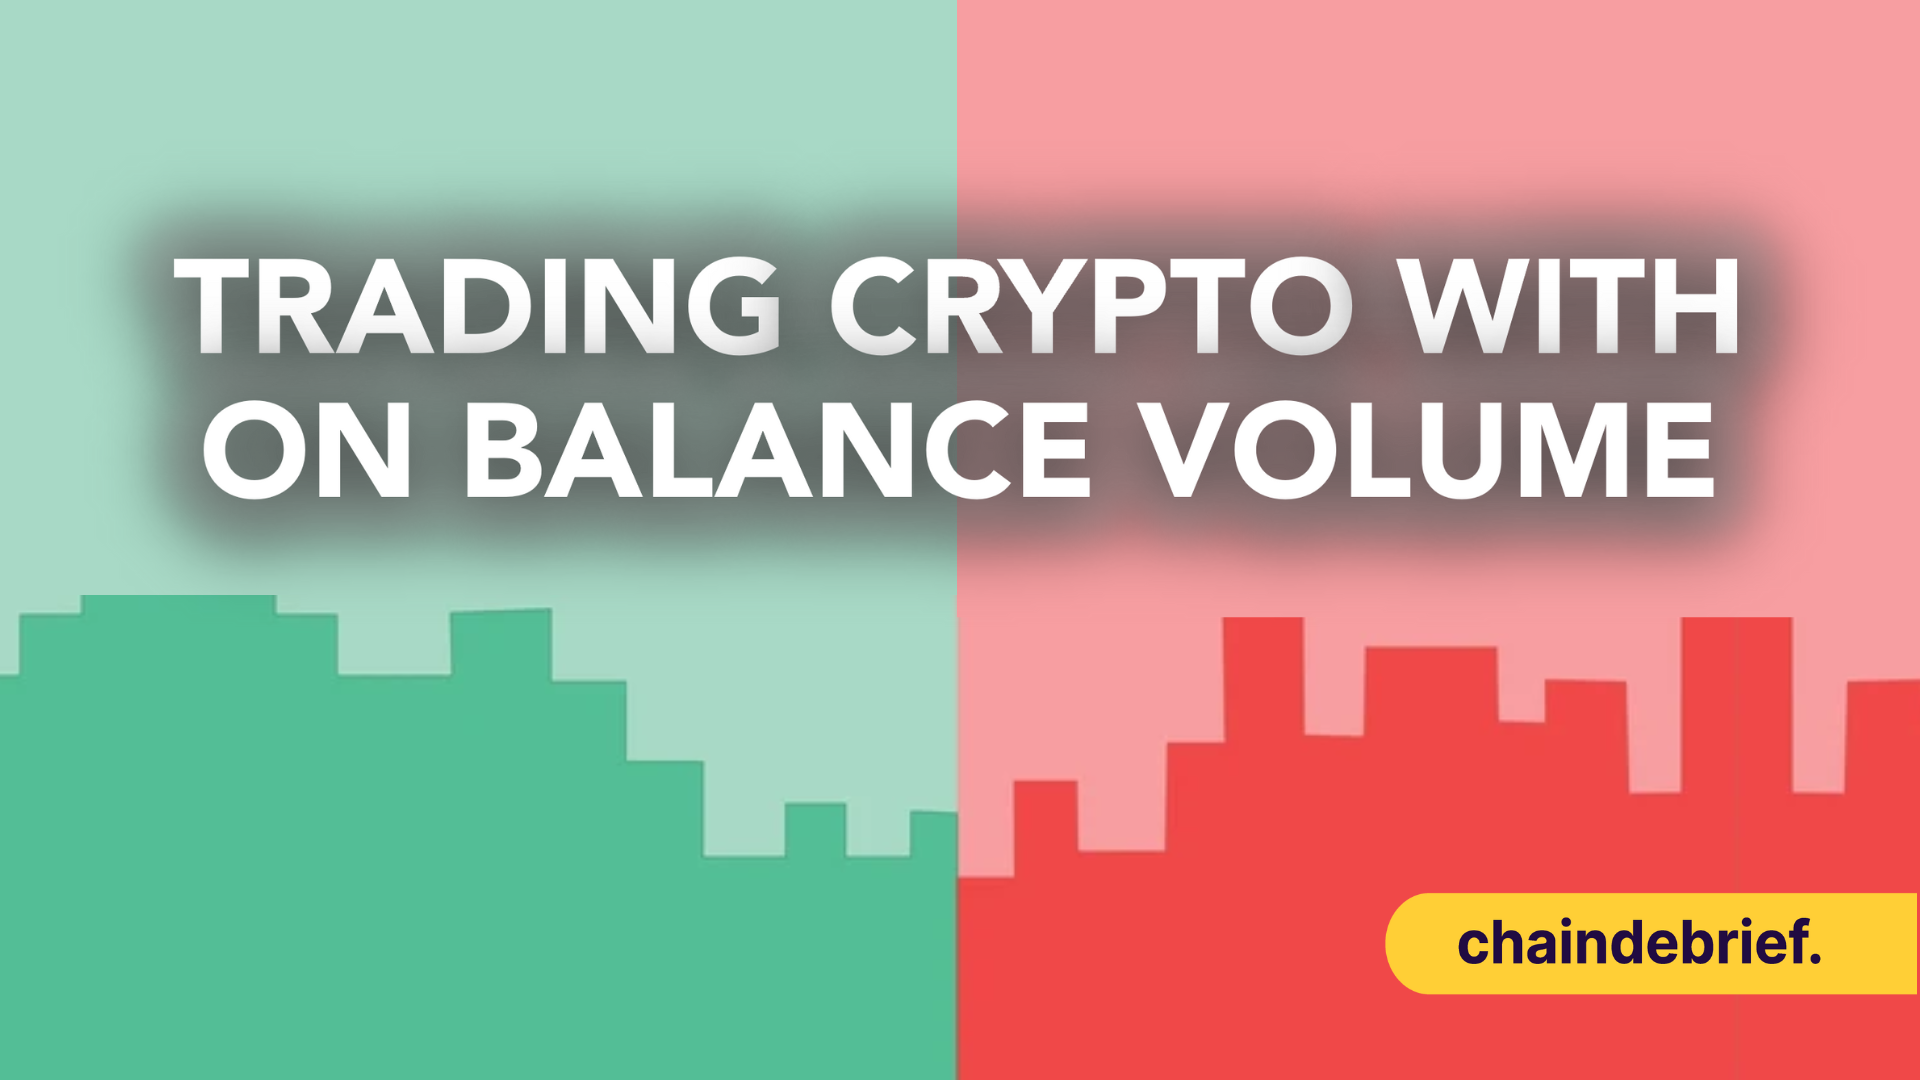 Using The On Balance Volume (OBV) To Execute Your Crypto Trades